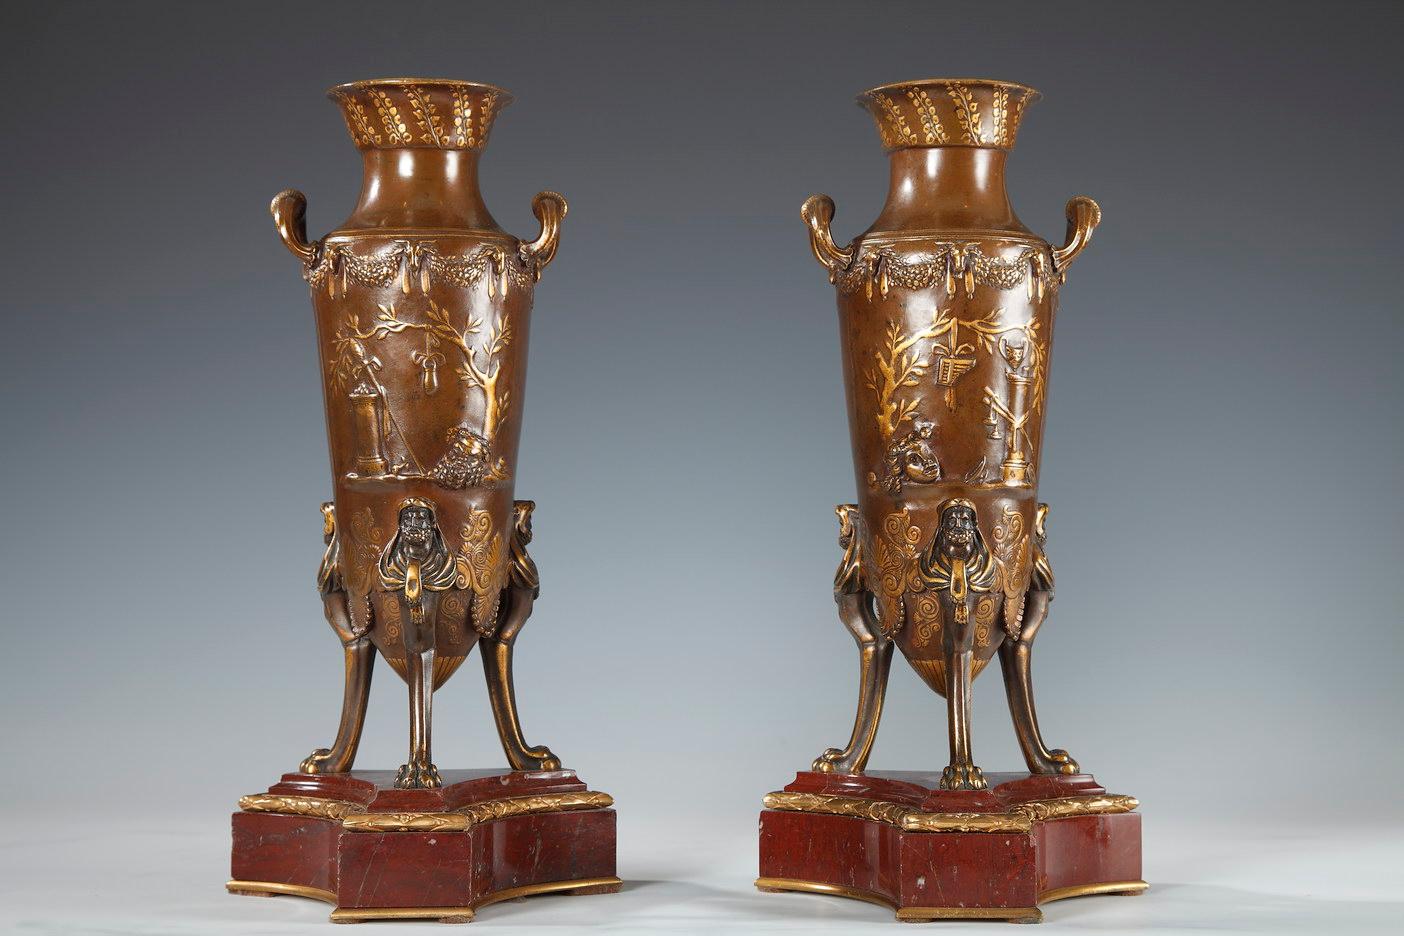 Gilt Pair of Neo-Greek Amphora Vases by Barbedienne and Levillain, France, circa 1880 For Sale